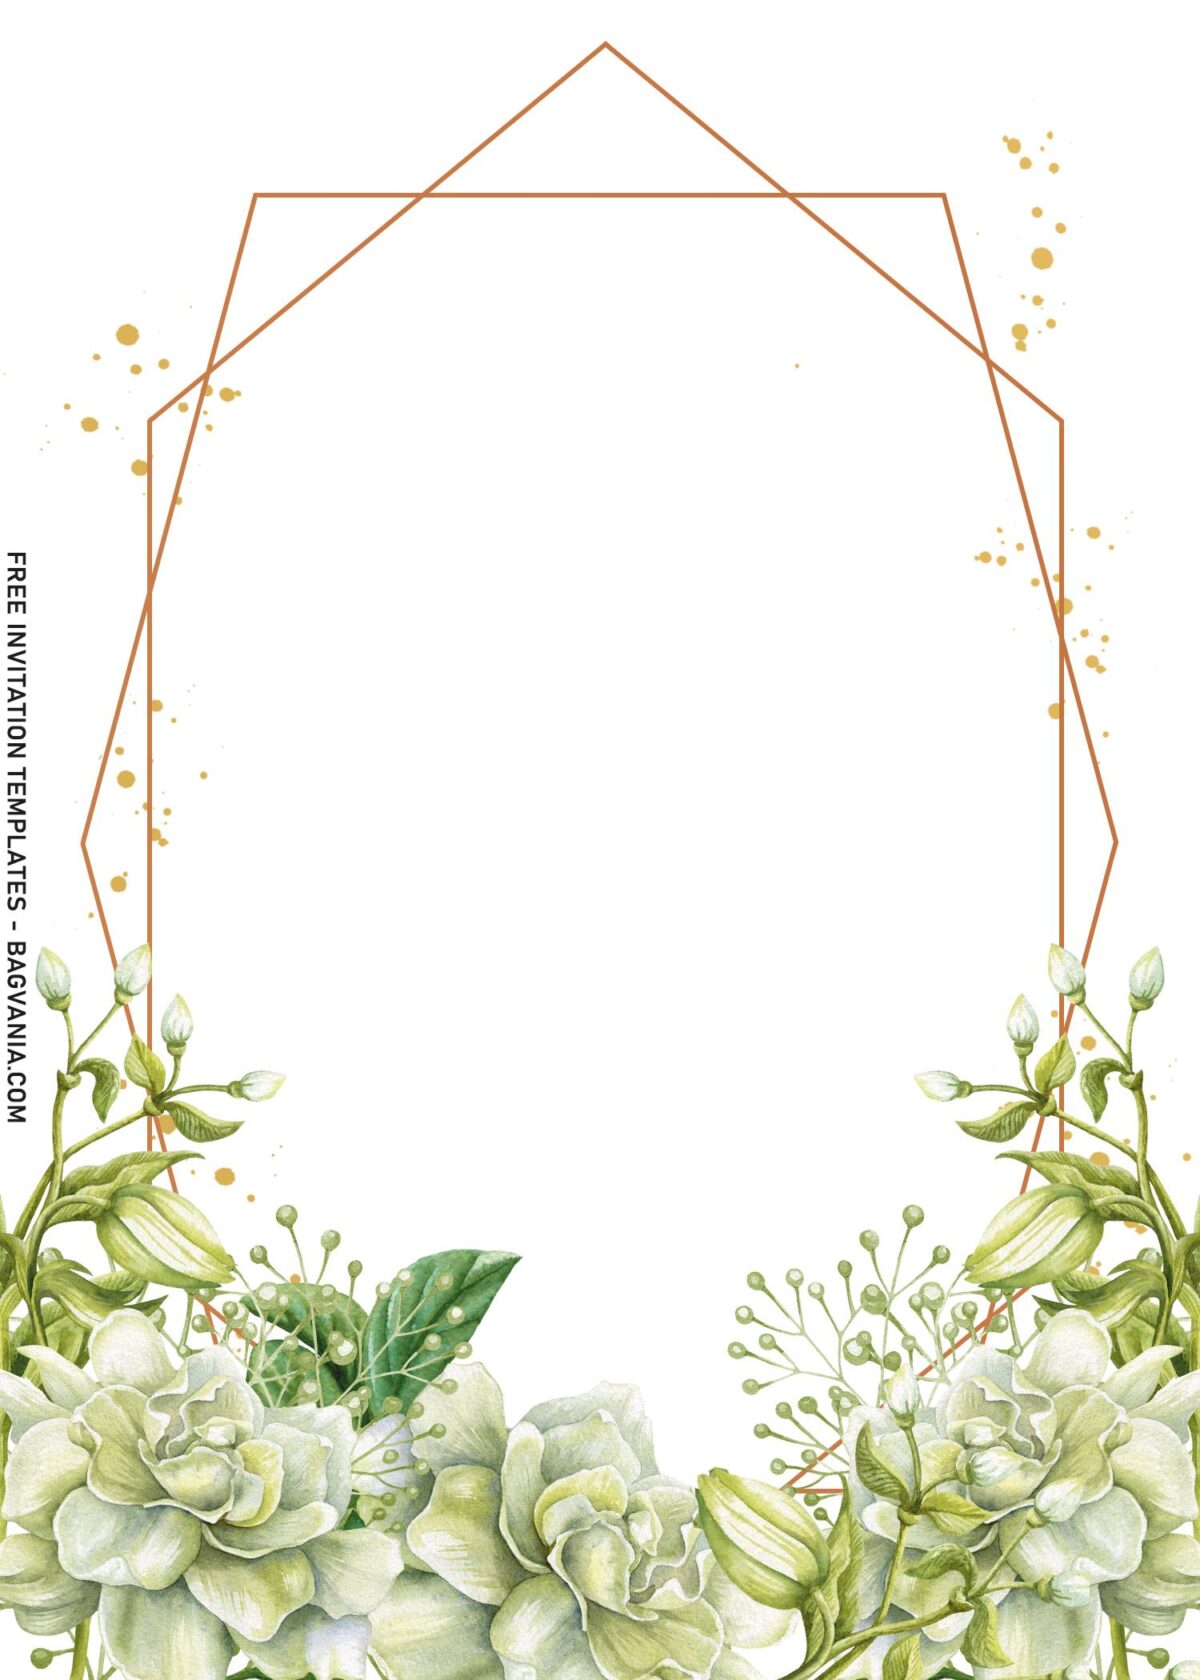 7+ Rustic & Chic Foliage Invitation Templates To Inspire You with modern geometric shapes